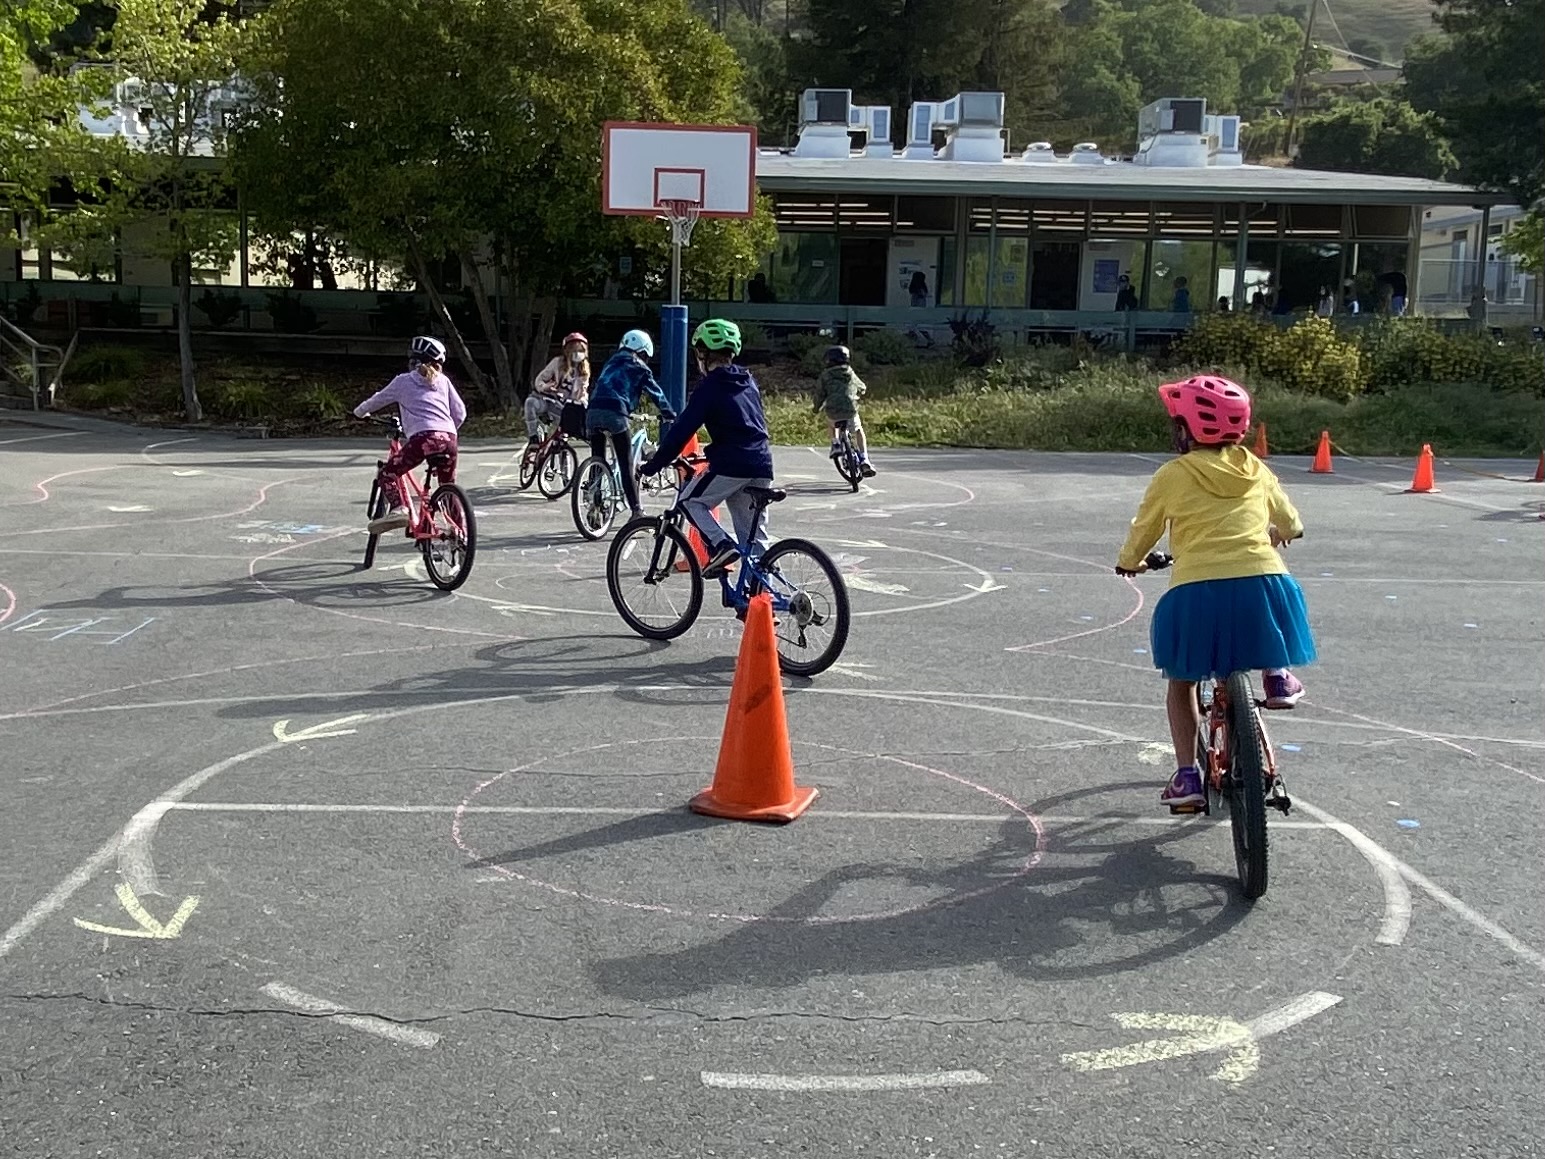 Children ride bicycles around a path marked with chalk